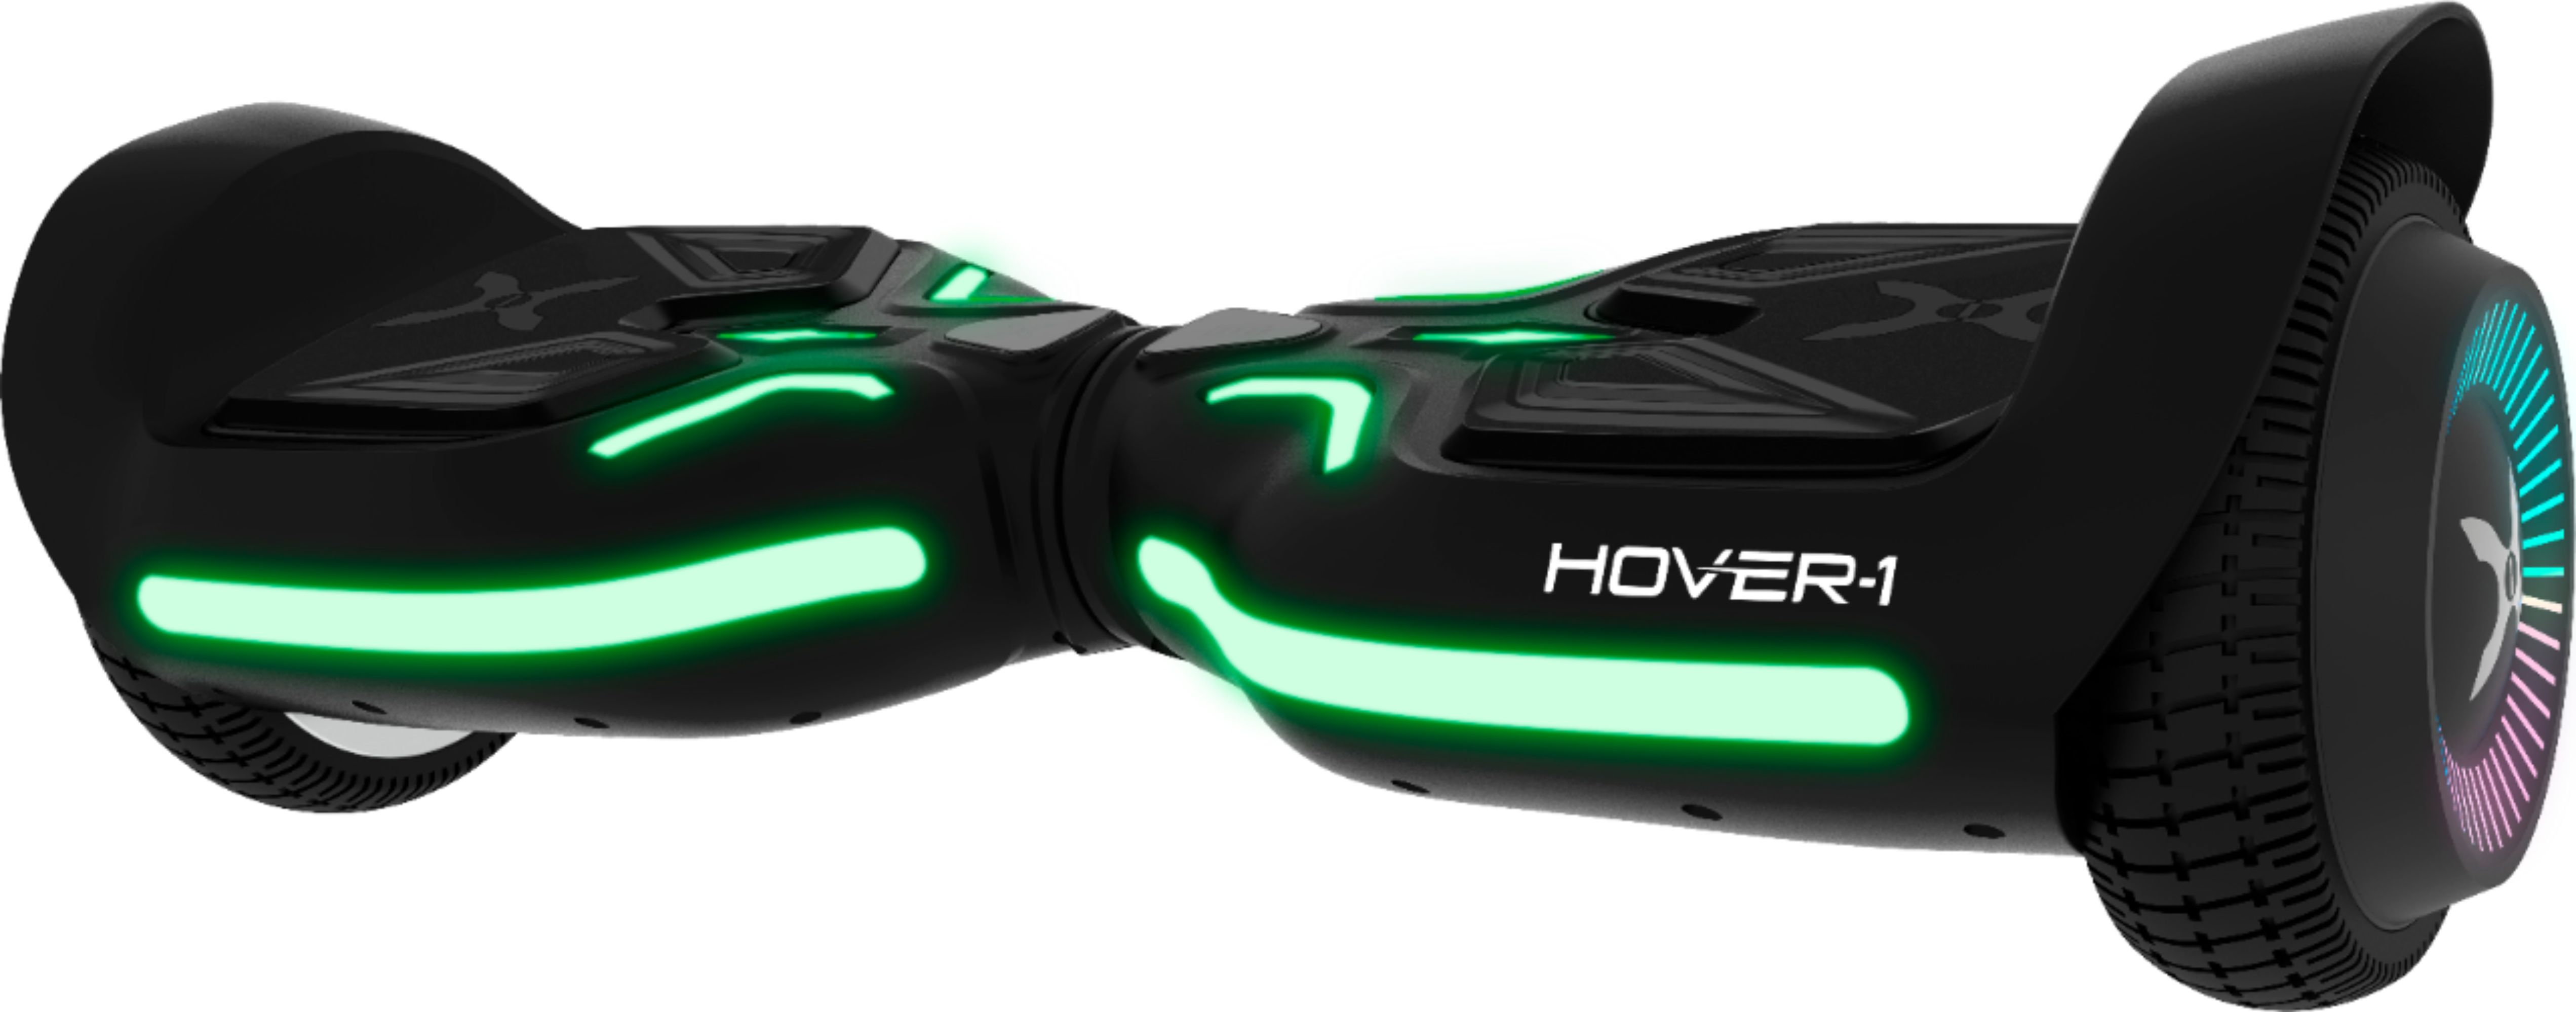 Hover-1 HELIX Hoverbaord Electric Scooter UL Certified Bluetooth LED Lighting 